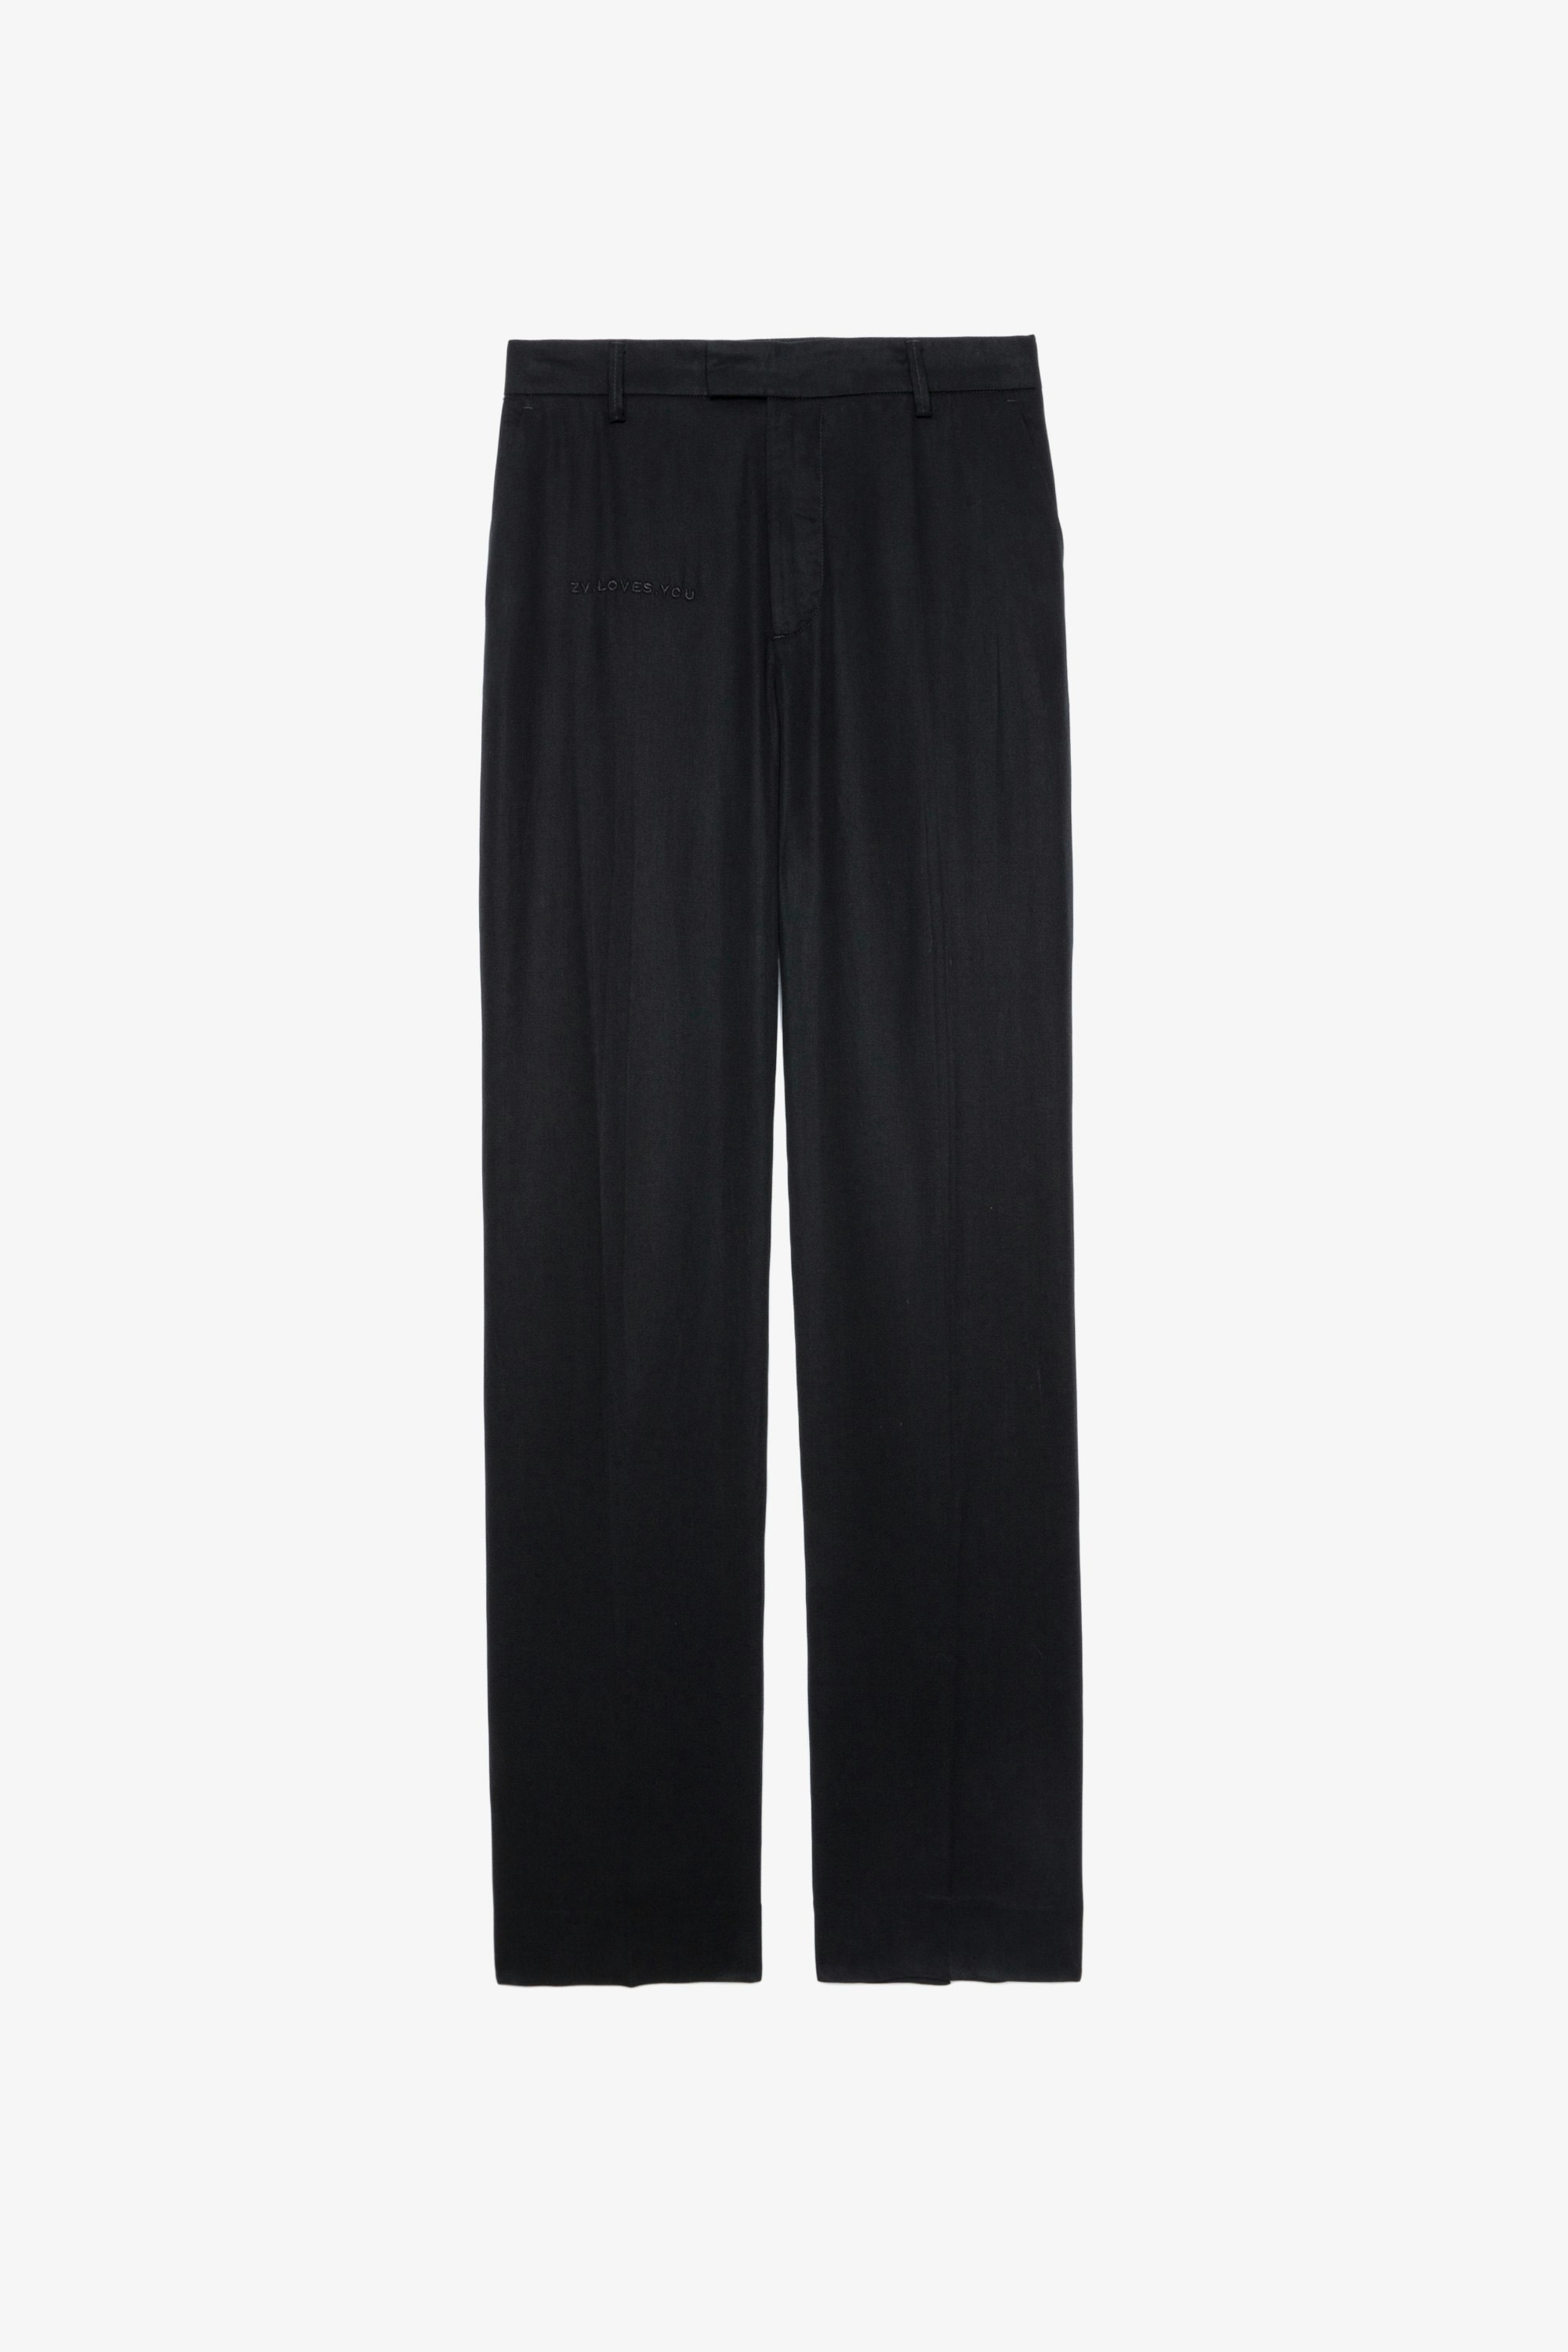 Peter Trousers Women's wide-leg black trousers with embroidered "ZV.LOVES.YOU" slogan